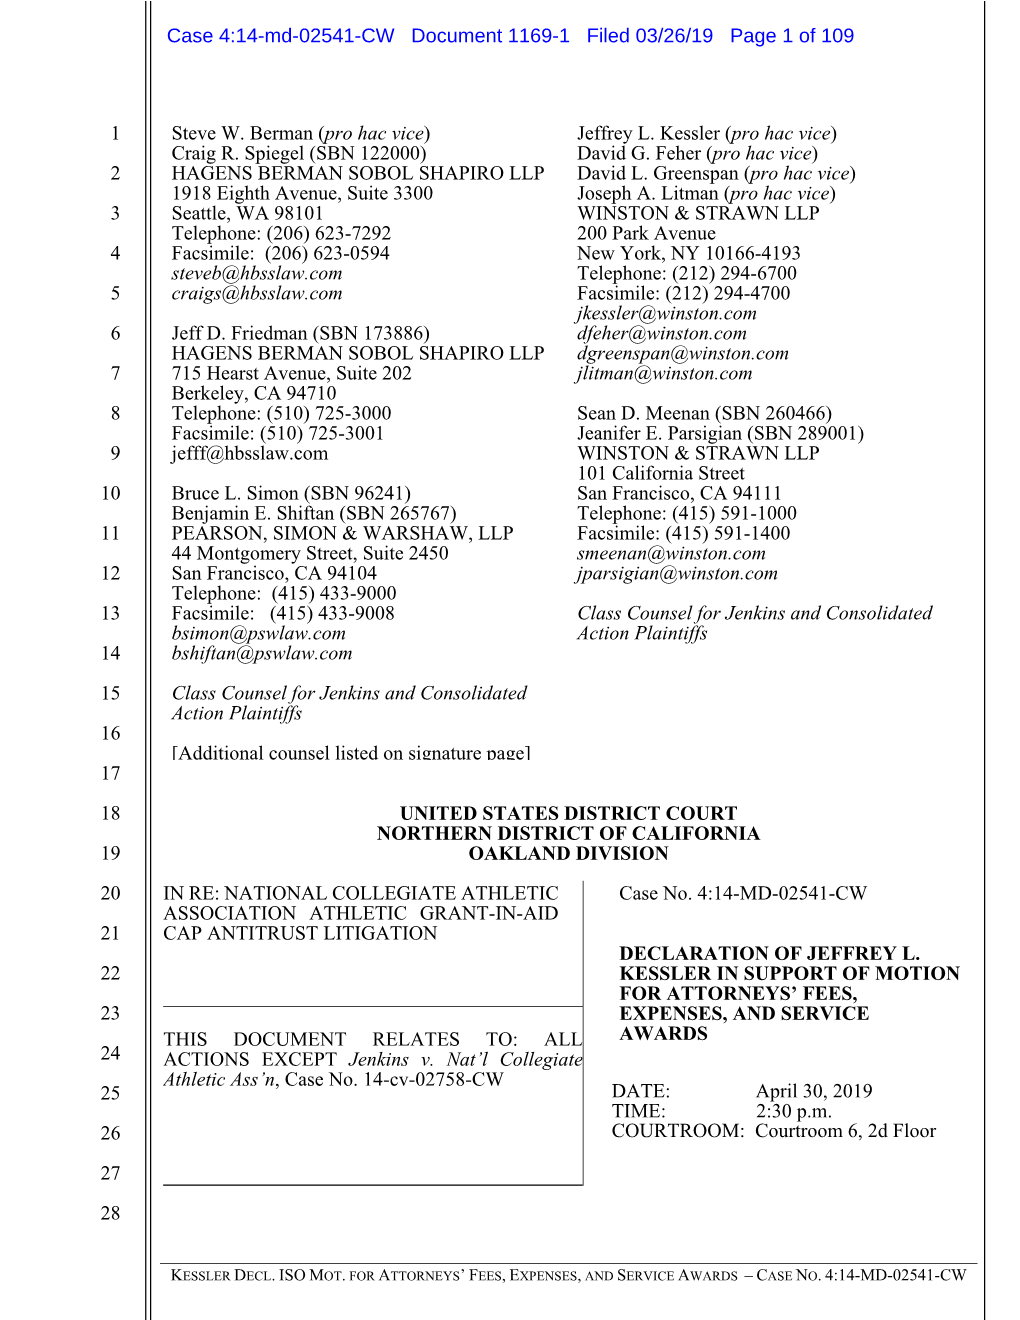 Case 4:14-Md-02541-CW Document 1169-1 Filed 03/26/19 Page 1 of 109